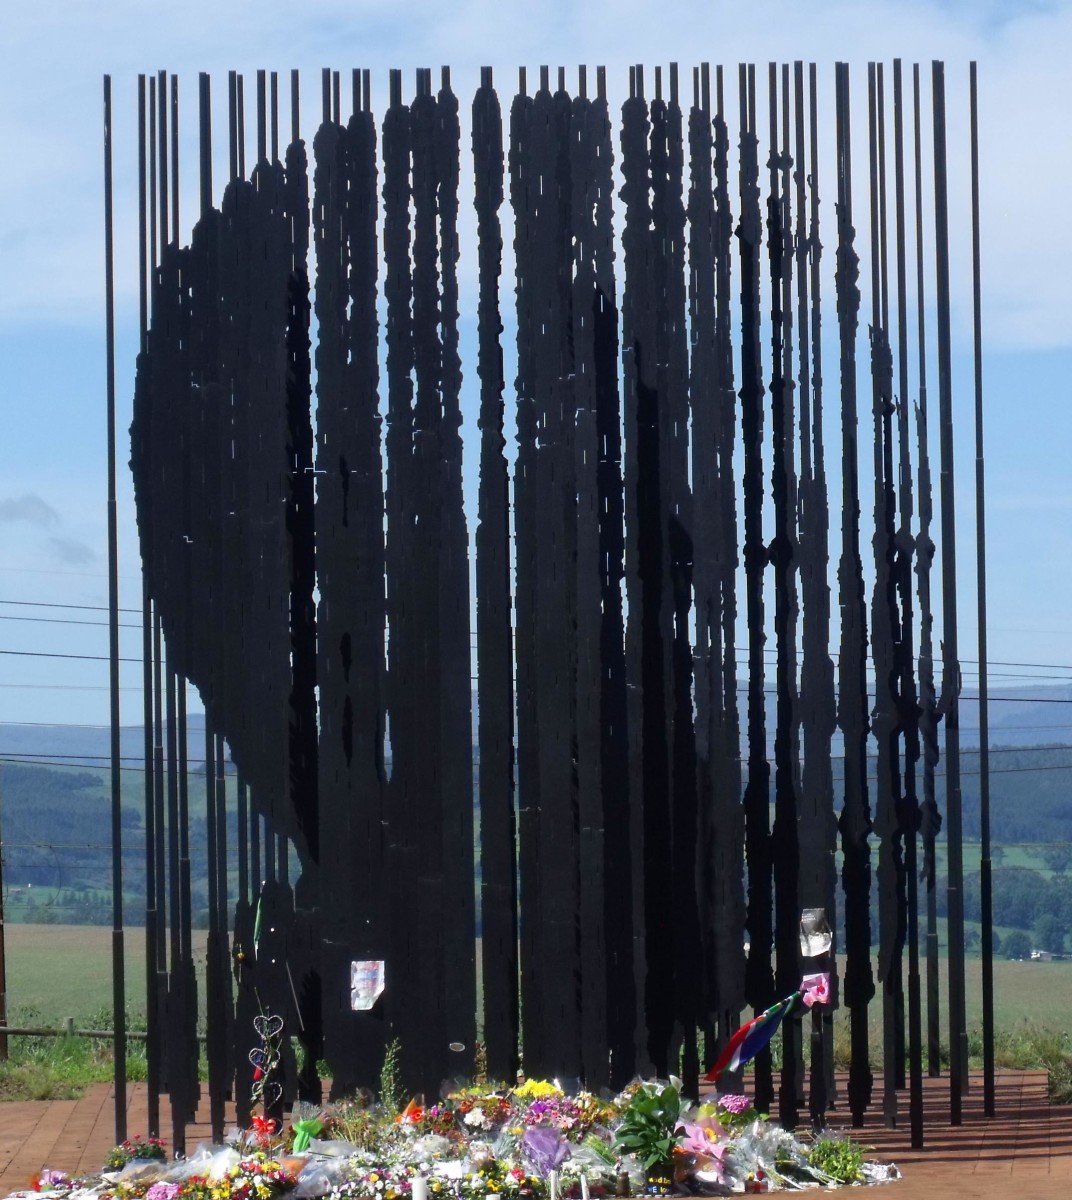 There are 50 steel columns that make up this sculpture and you have to stand in the right spot to see the face. 